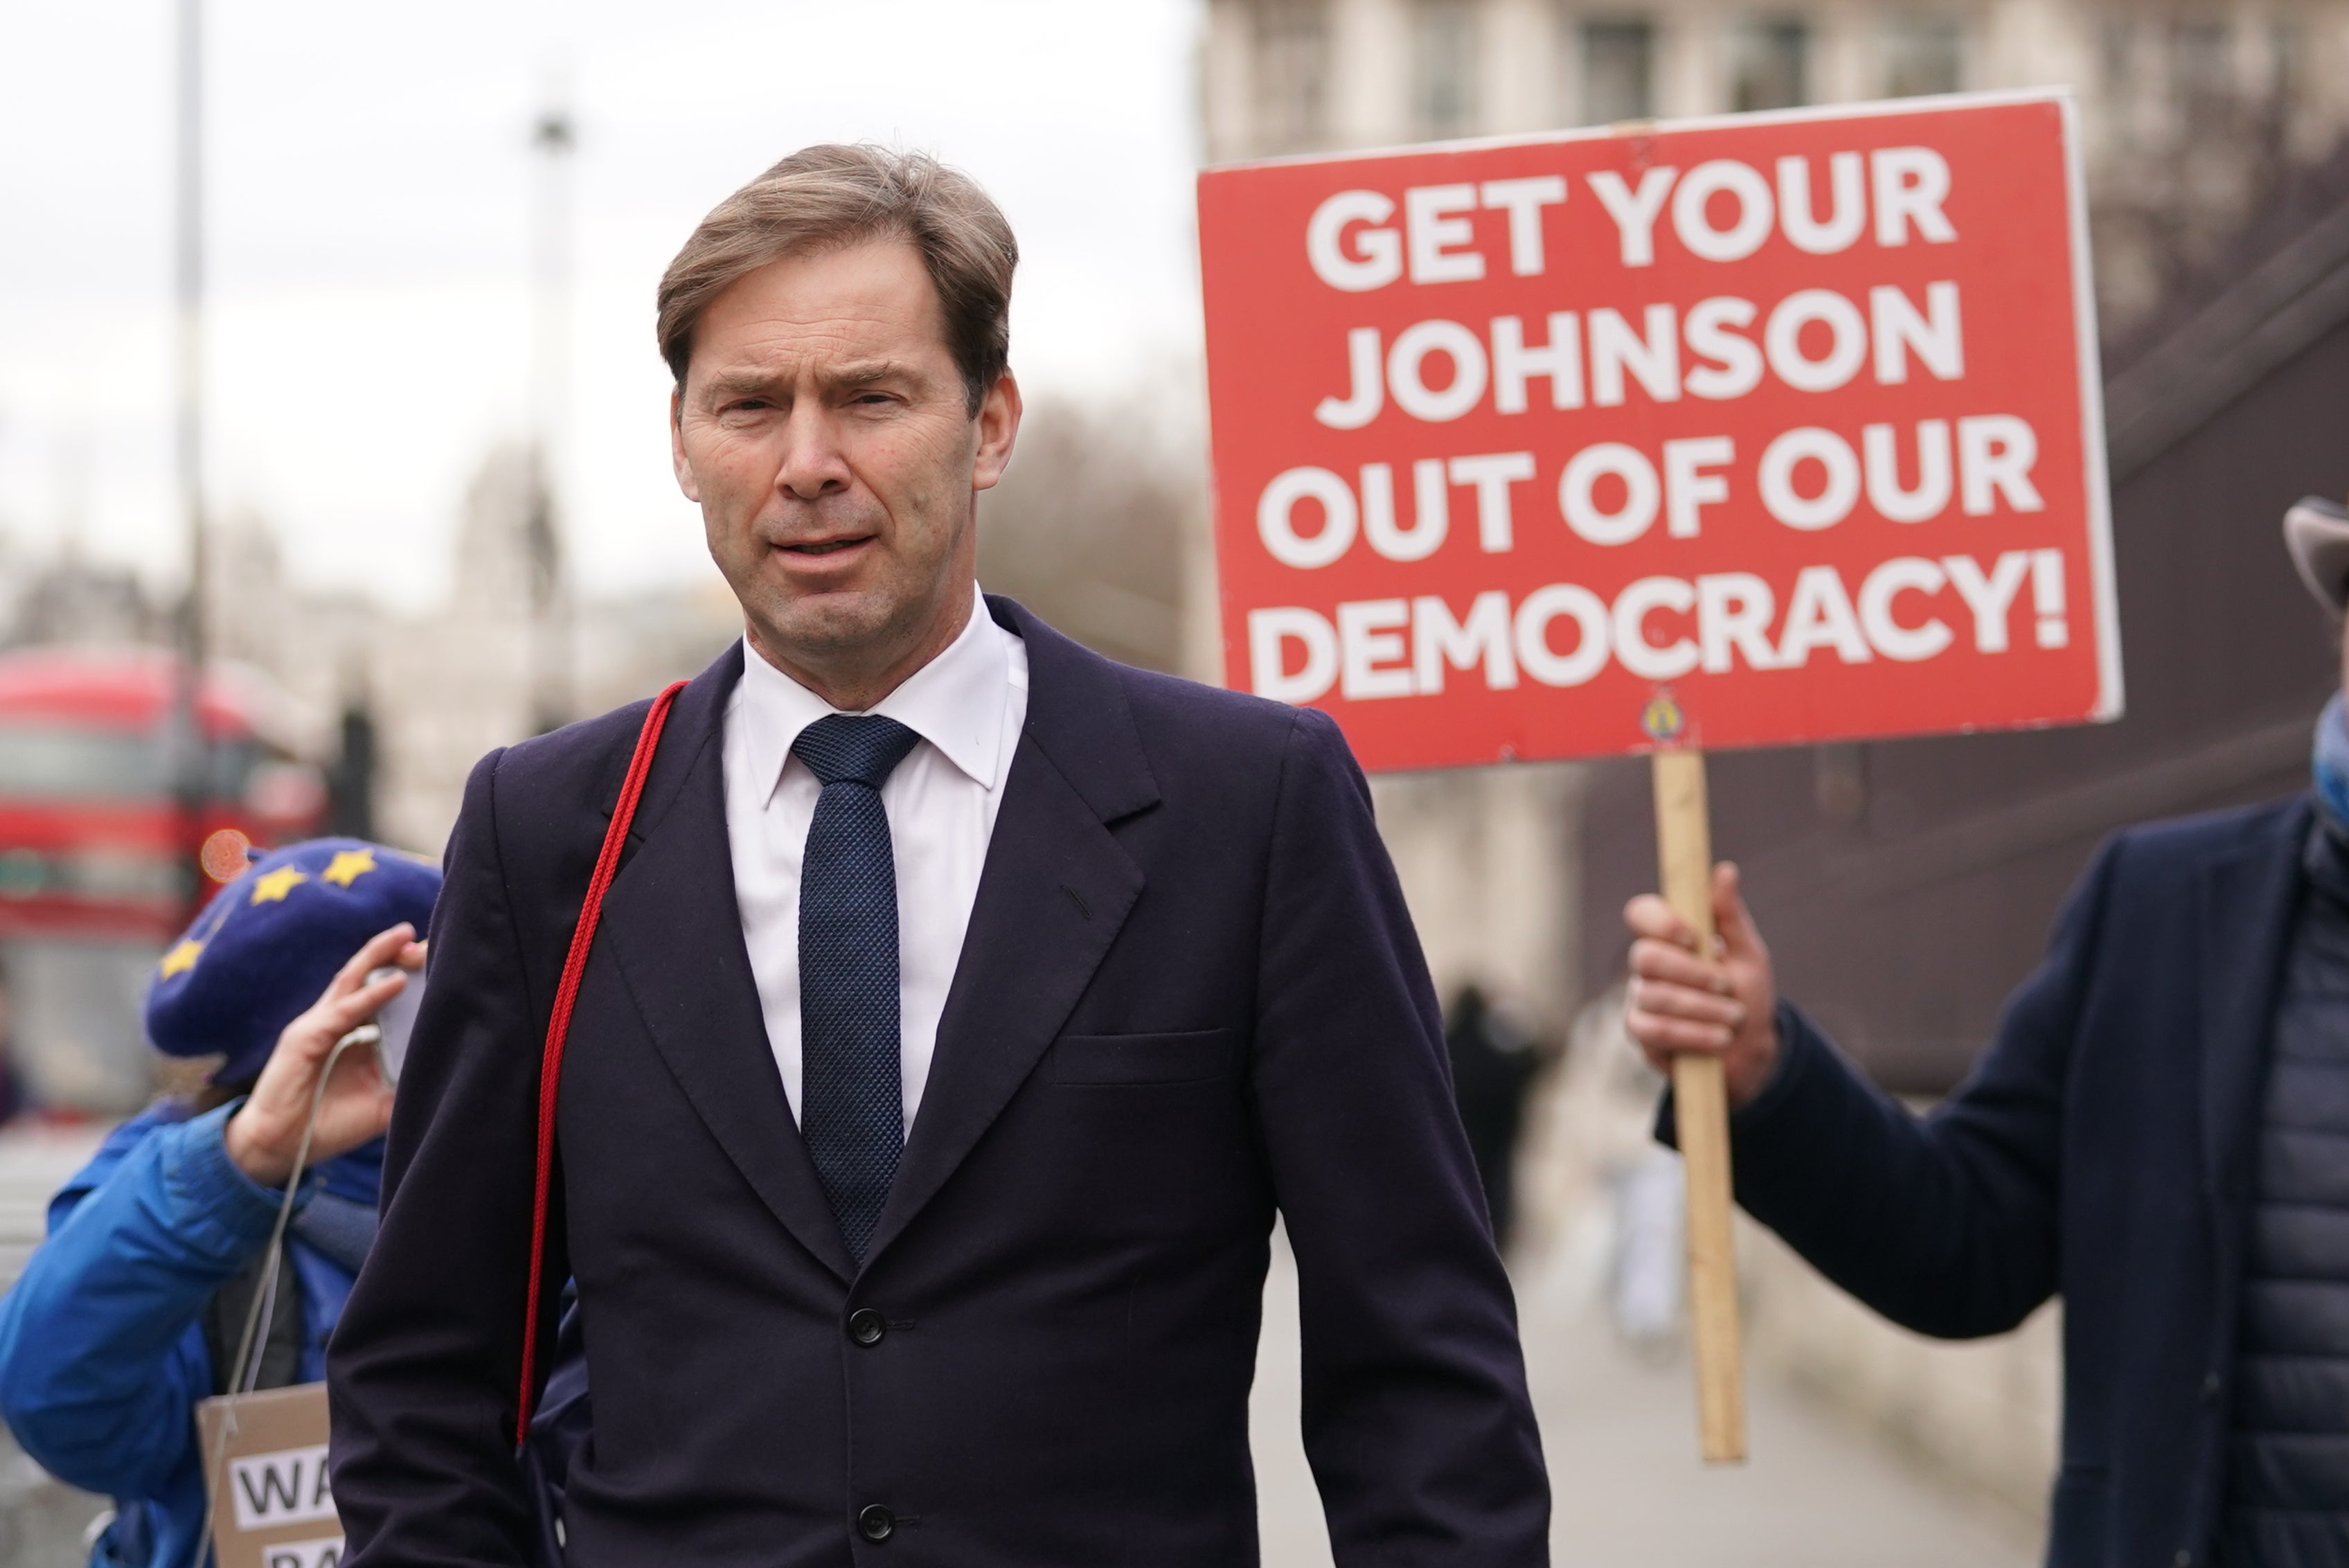 Tobias Ellwood said Boris Johnson’s days as Prime Minister are numbered and called for a Cabinet reshuffle (Kirsty O’Connor/PA)